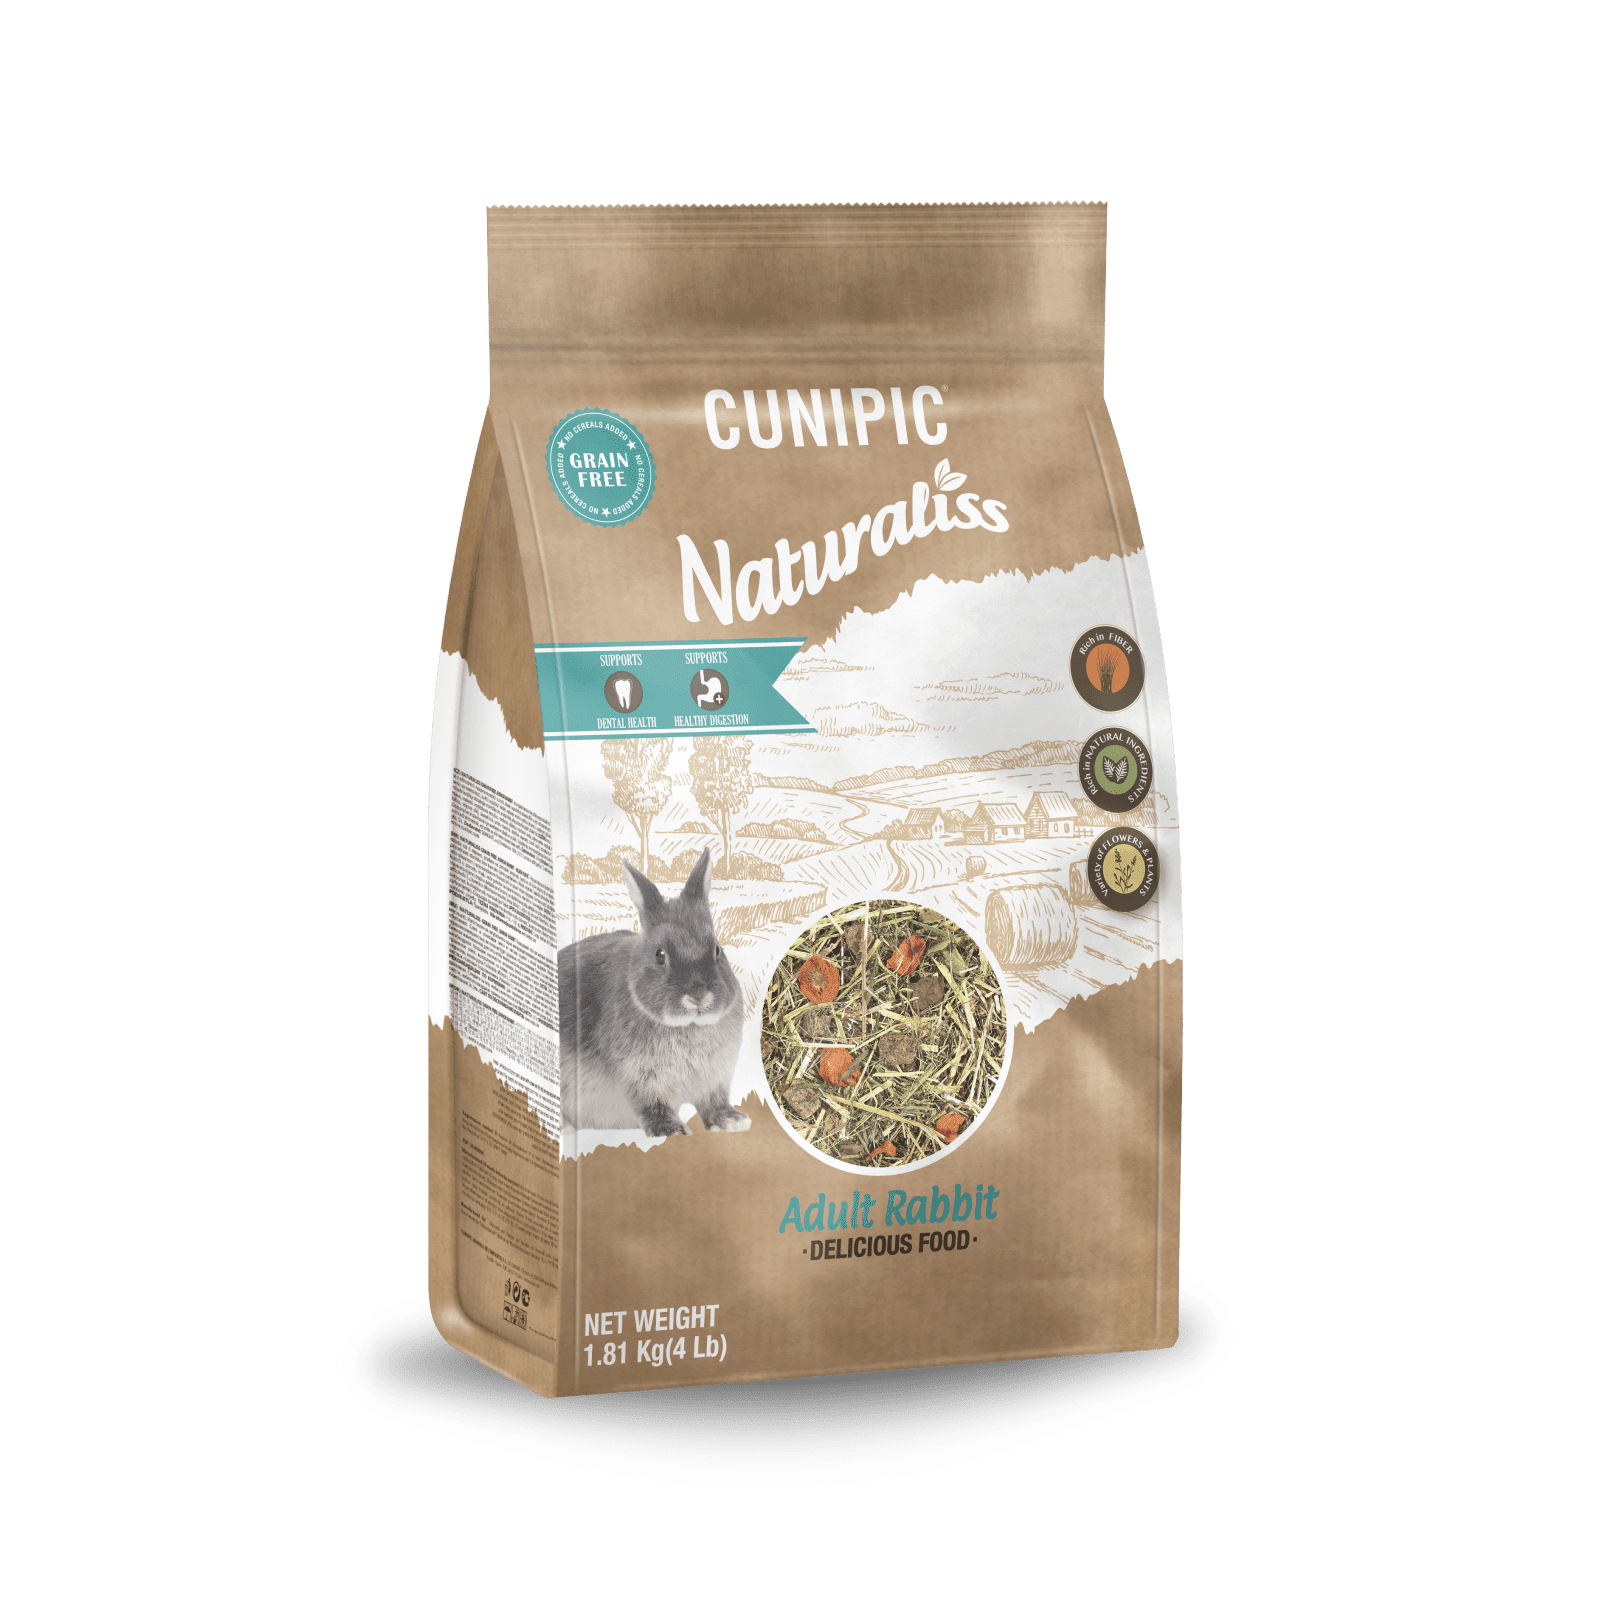 Naturaliss Lapin Adulte 1.81kg - Cunipic